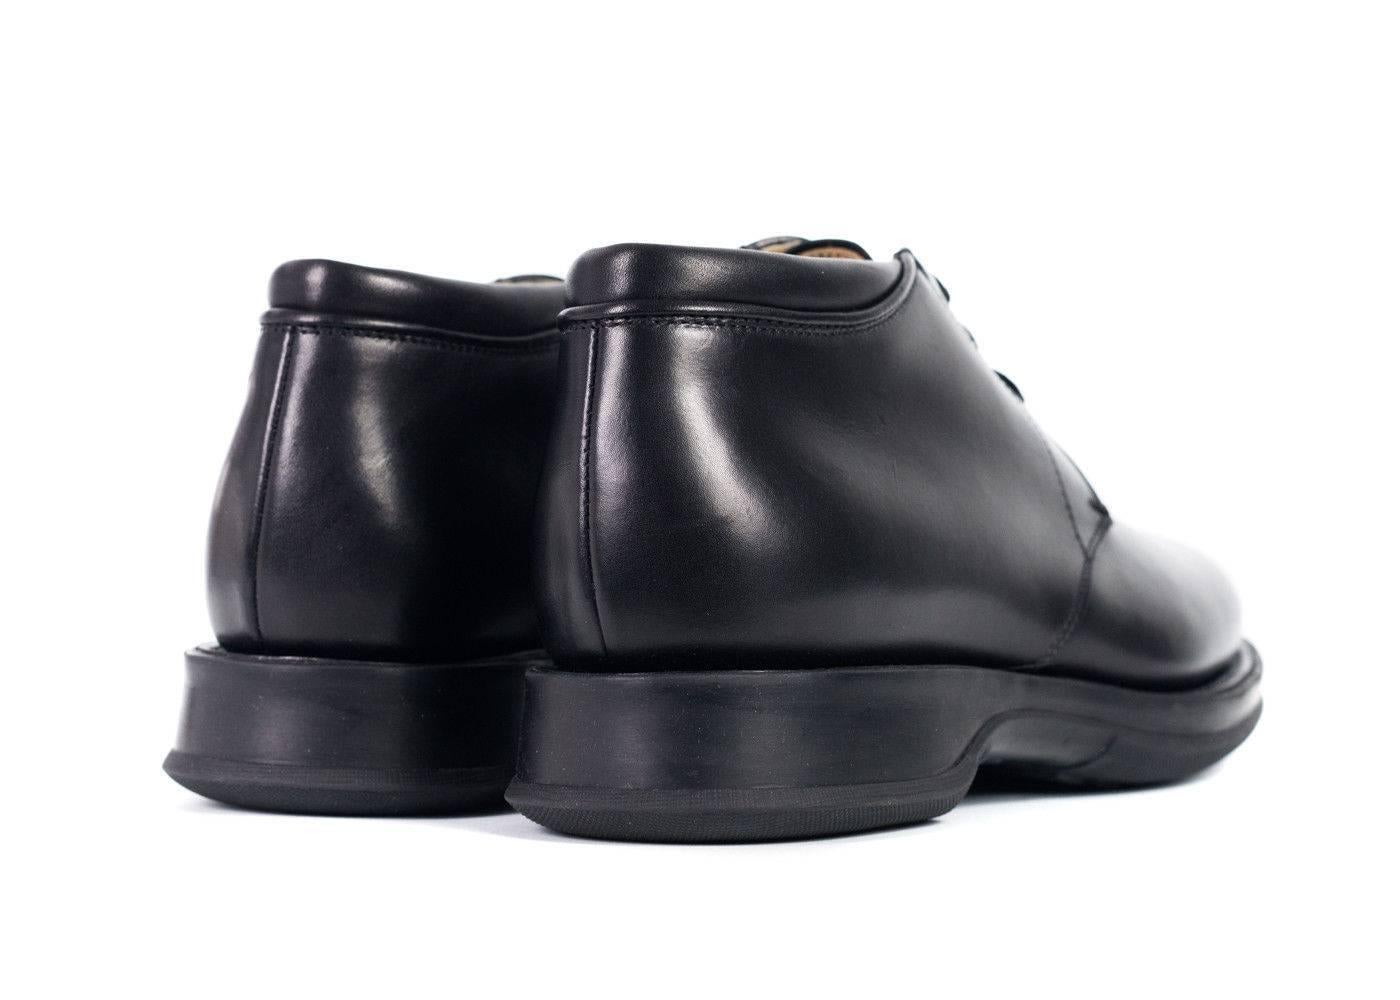 Churchs lace up shoes in a gorgeous blackn leather. These lace up shoes are perfect for professional occasions or worn as a trendy casual look. Pair it with a pair of culottes or black jeans with a striped button down or feminine blouse for a chic